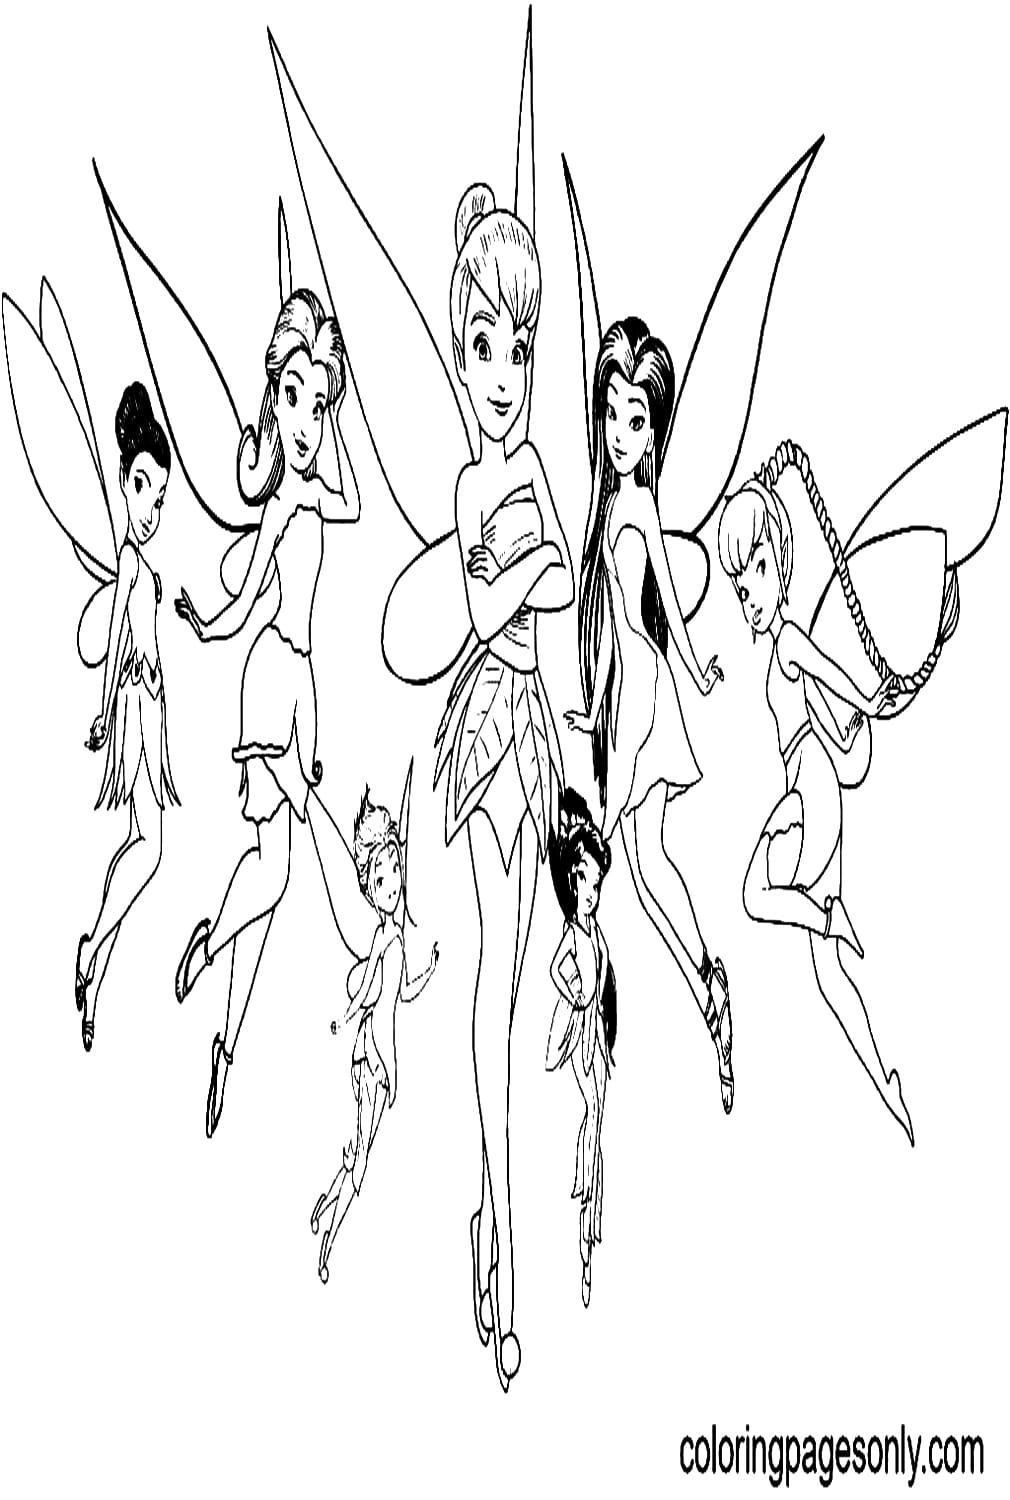 Tinker Bell with Fairy Friends Coloring Page